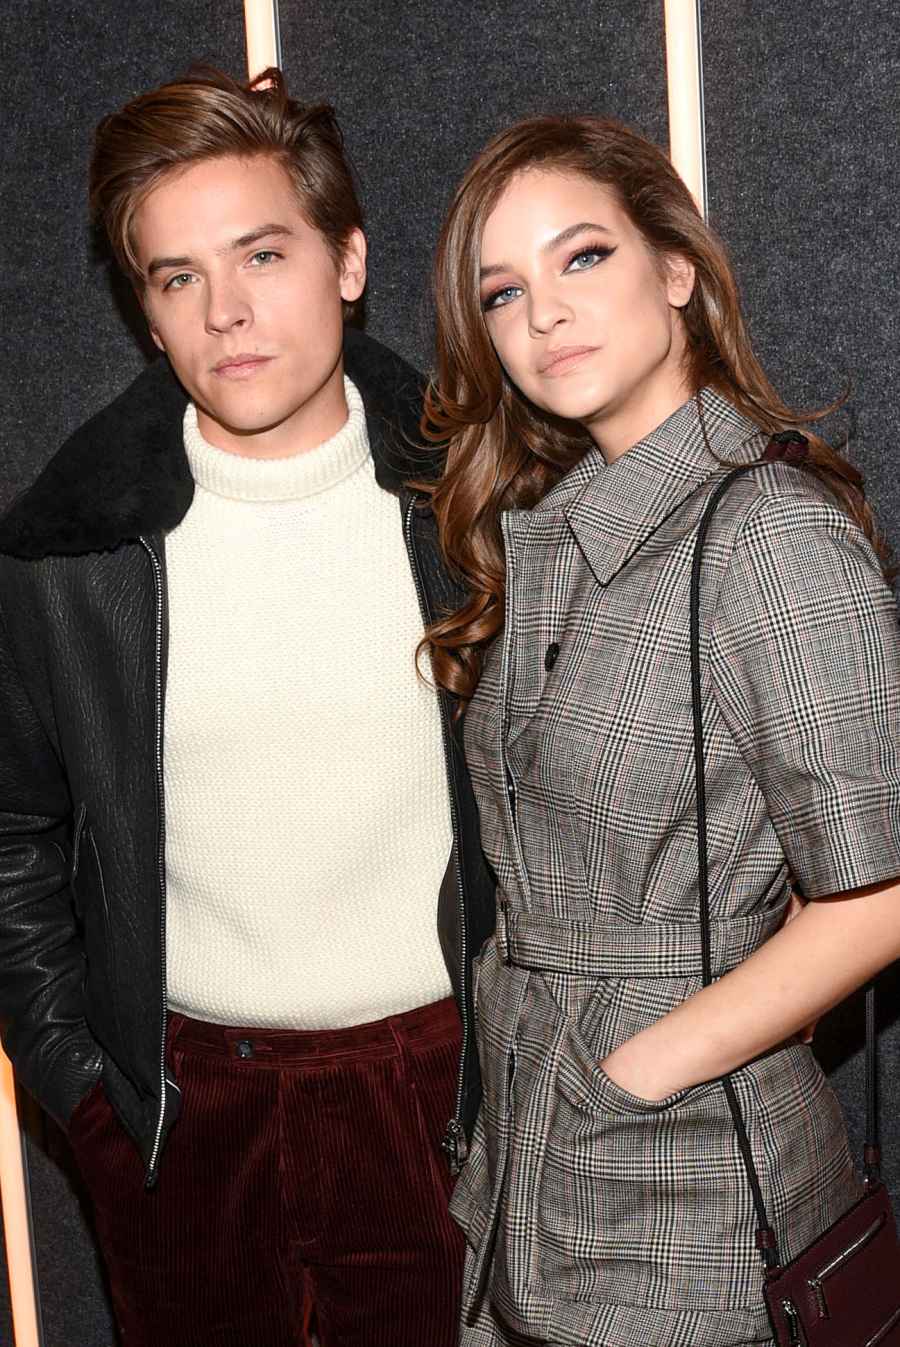 May 2018 Dylan Sprouse and Barbara Palvin Relationship Timeline